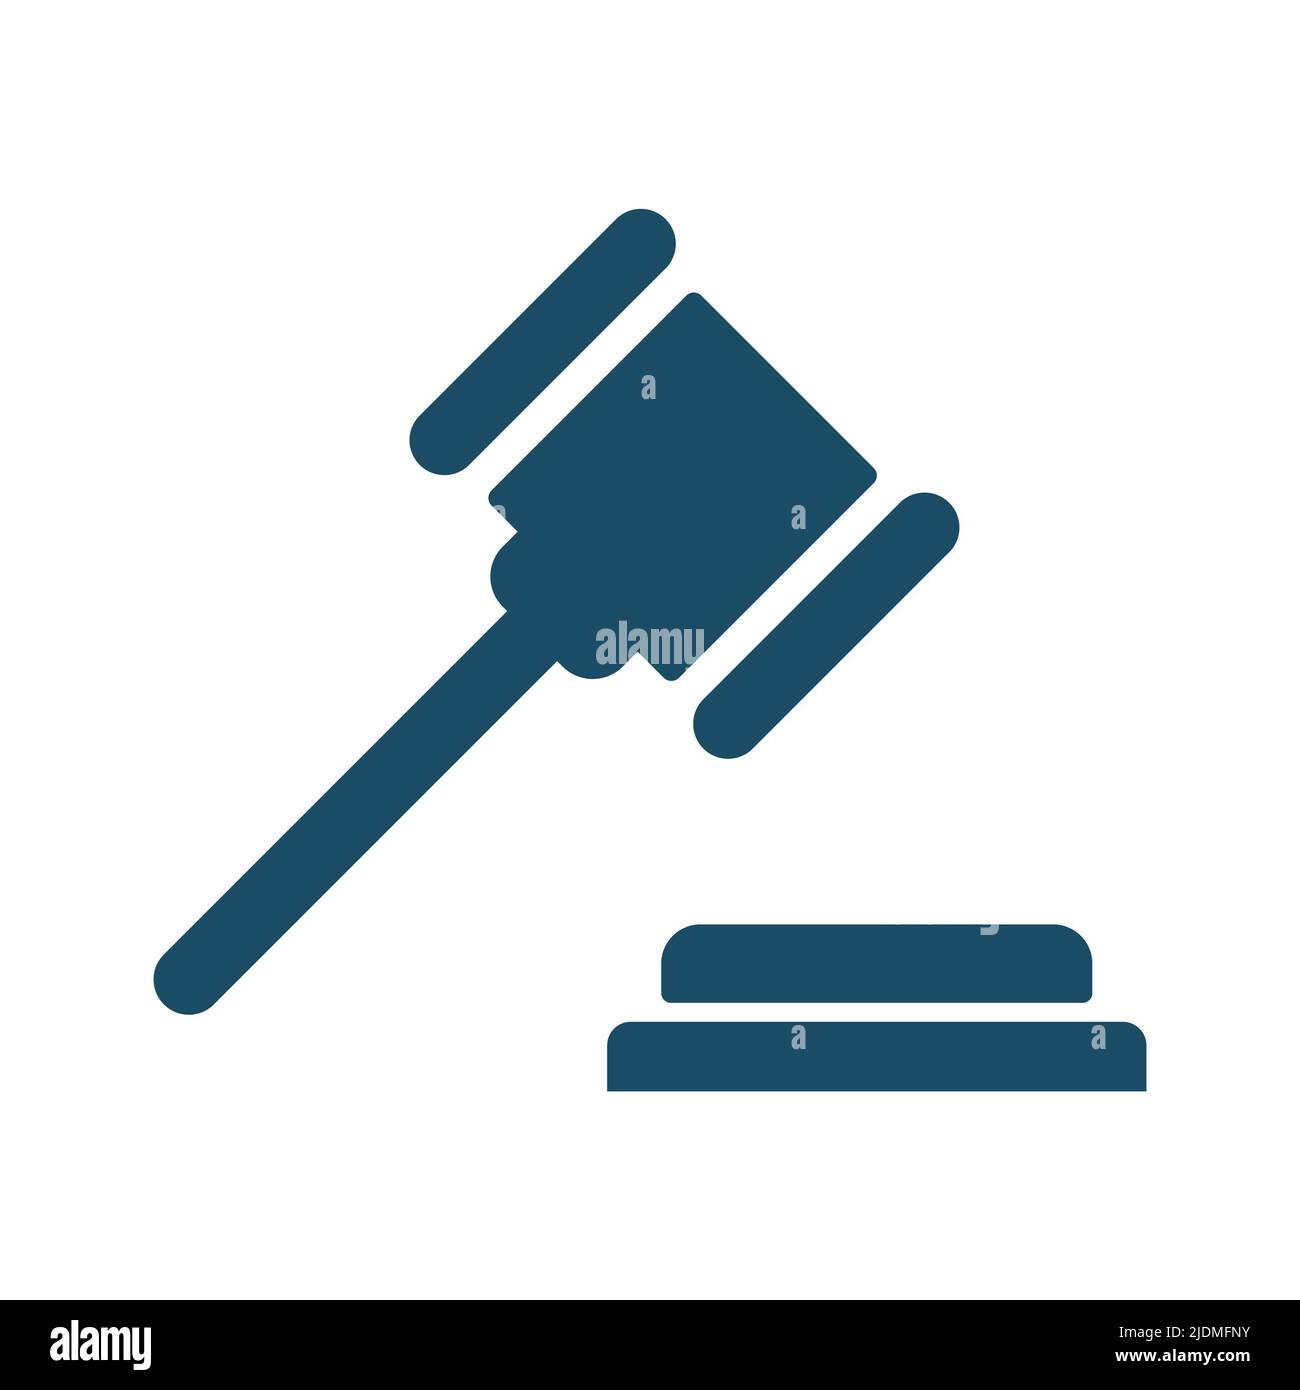 High quality dark blue judge gavel icon. Pictogram, icon set, illustration. Useful for web site, banner, greeting cards, apps and social media posts. Stock Photo